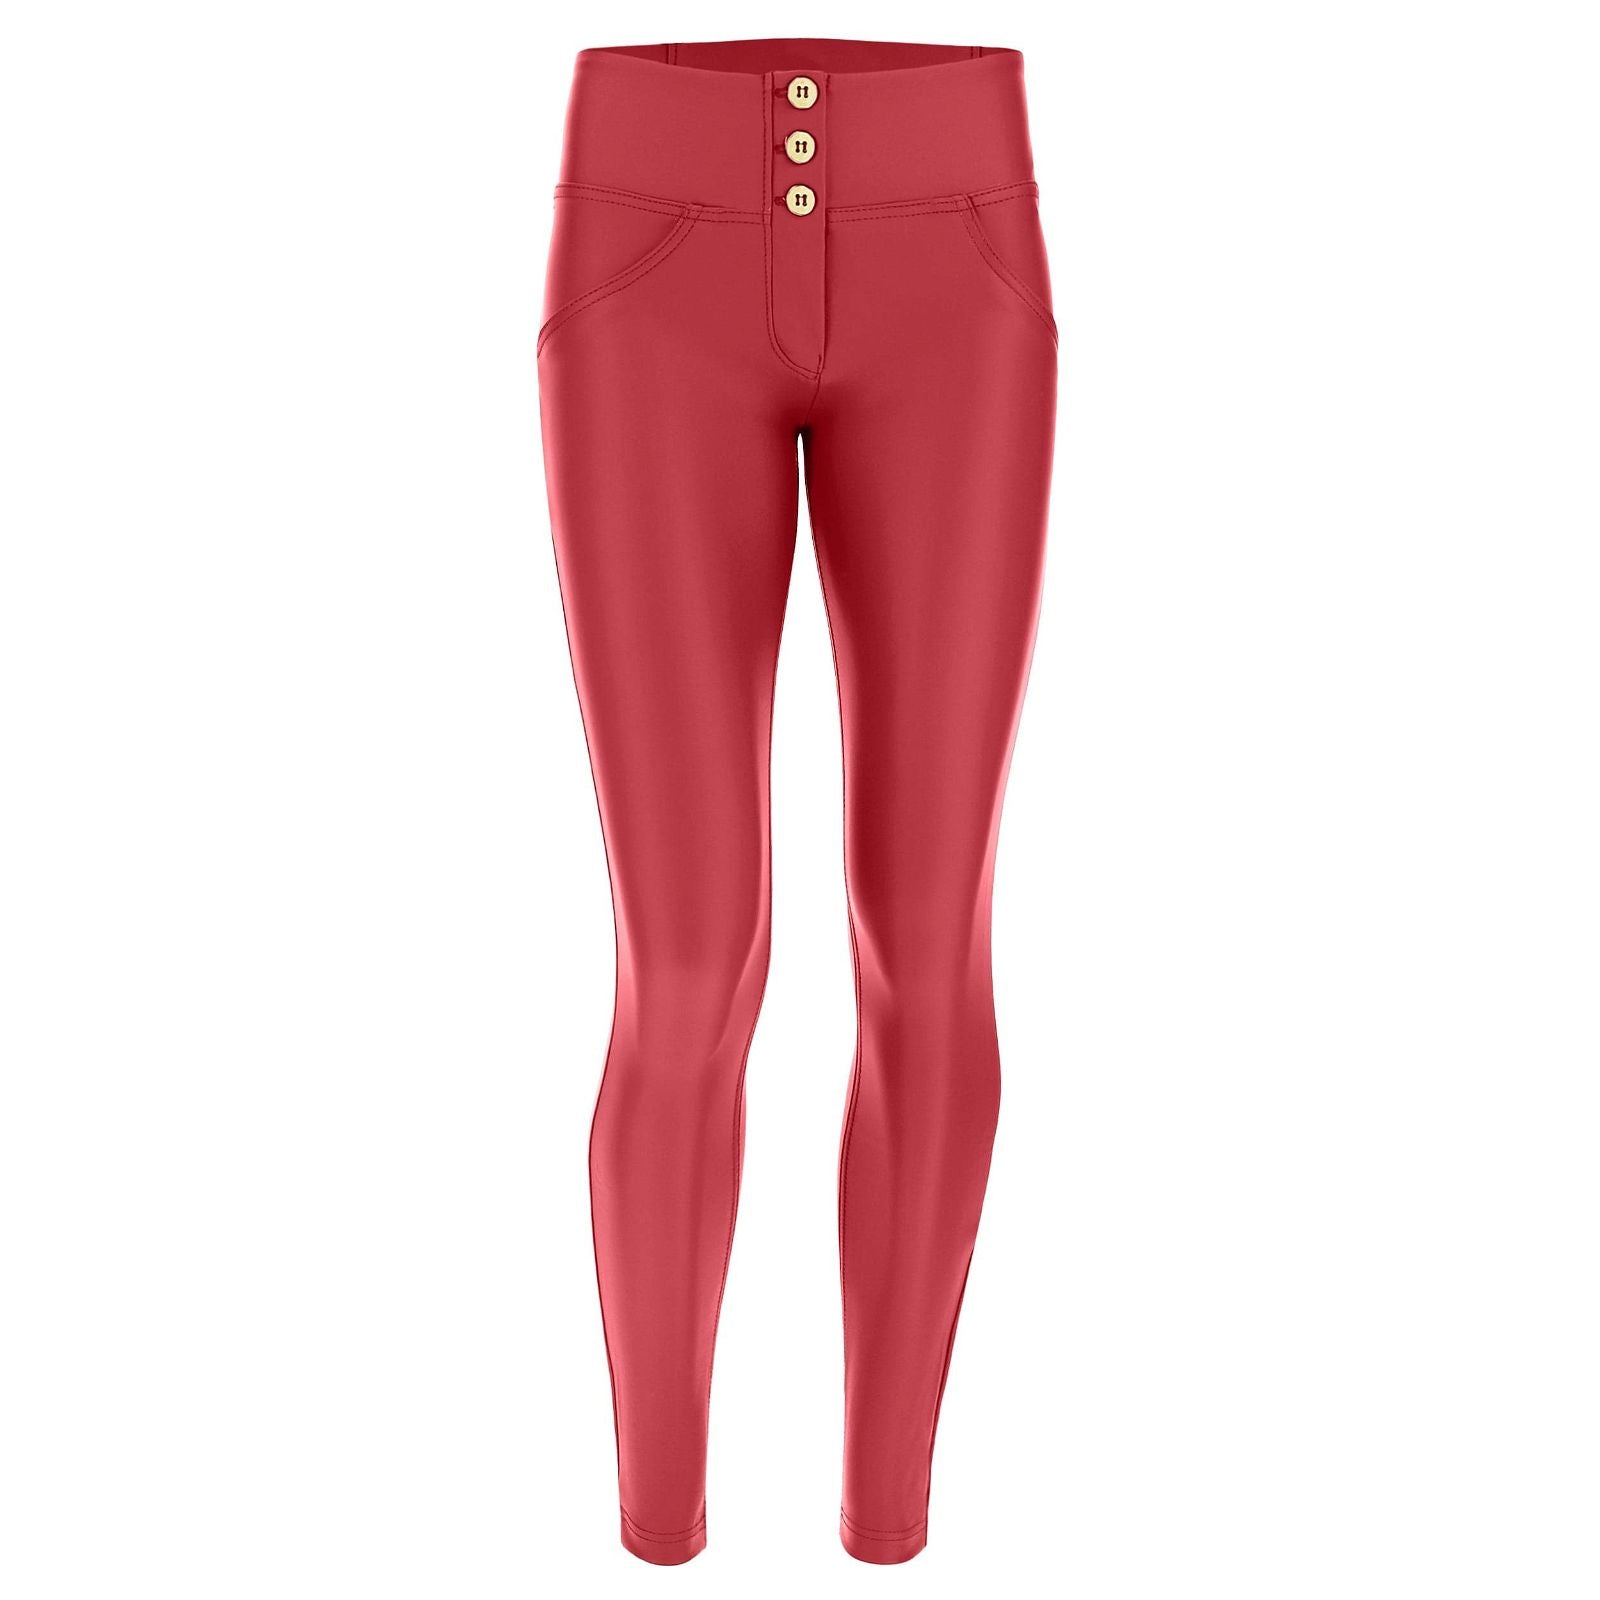 WR.UP® 3 Button Faux Leather - Mid Rise - Full Length - Deep Red 2